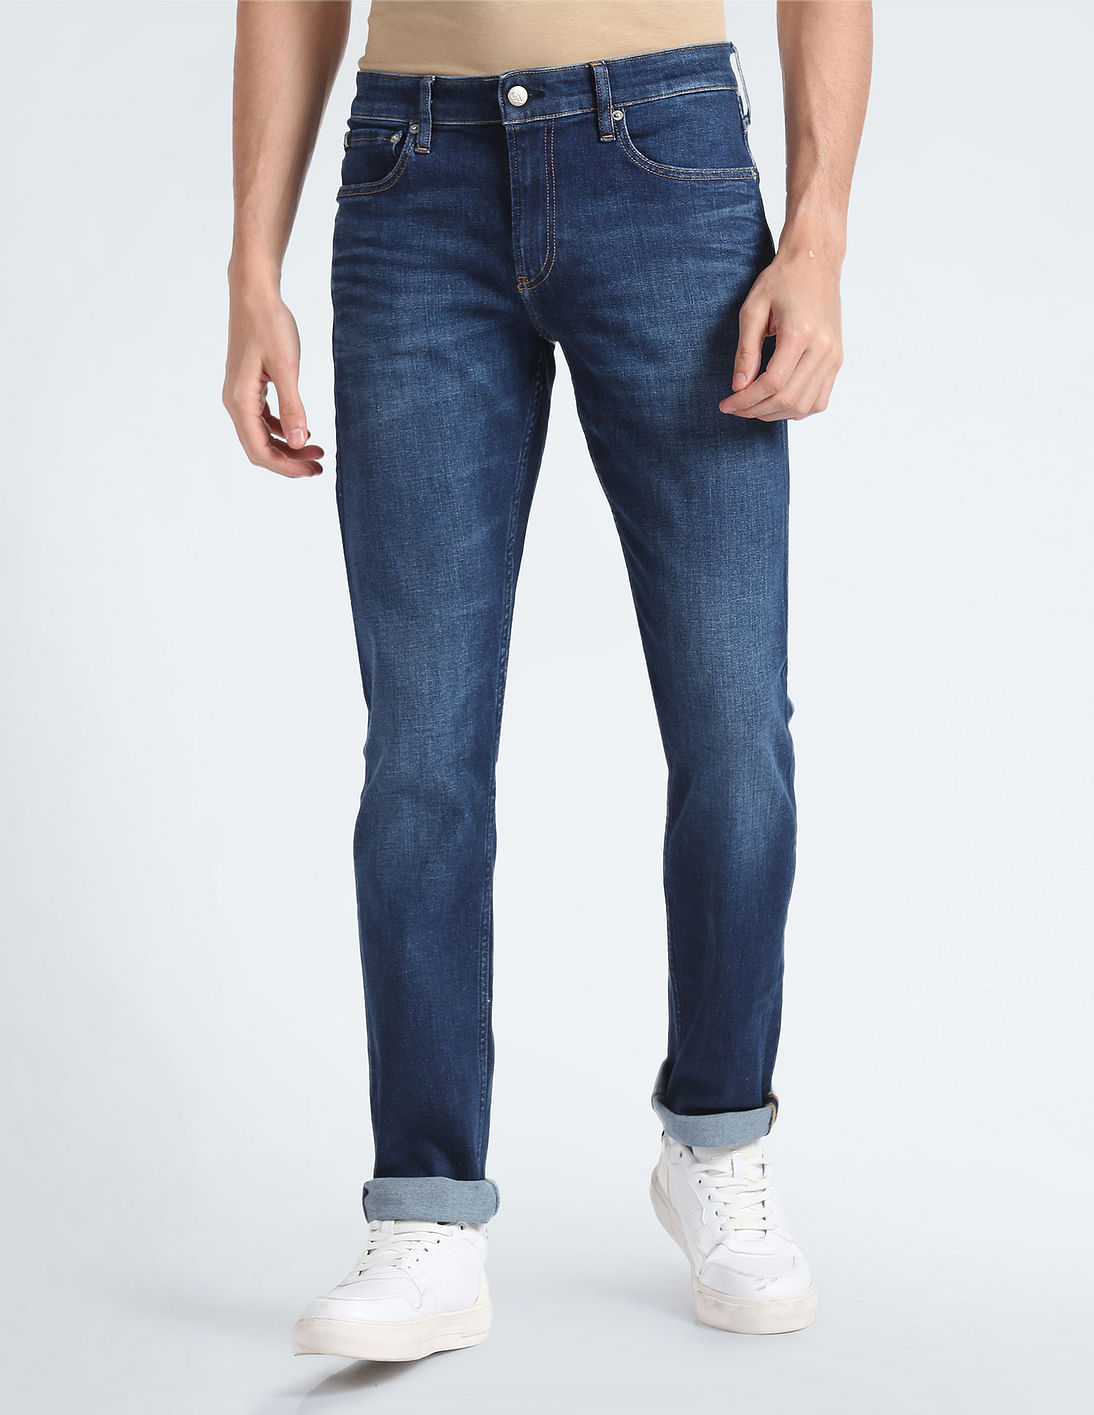 Buy Calvin Klein Sustainable Slim Fit Jeans - NNNOW.com